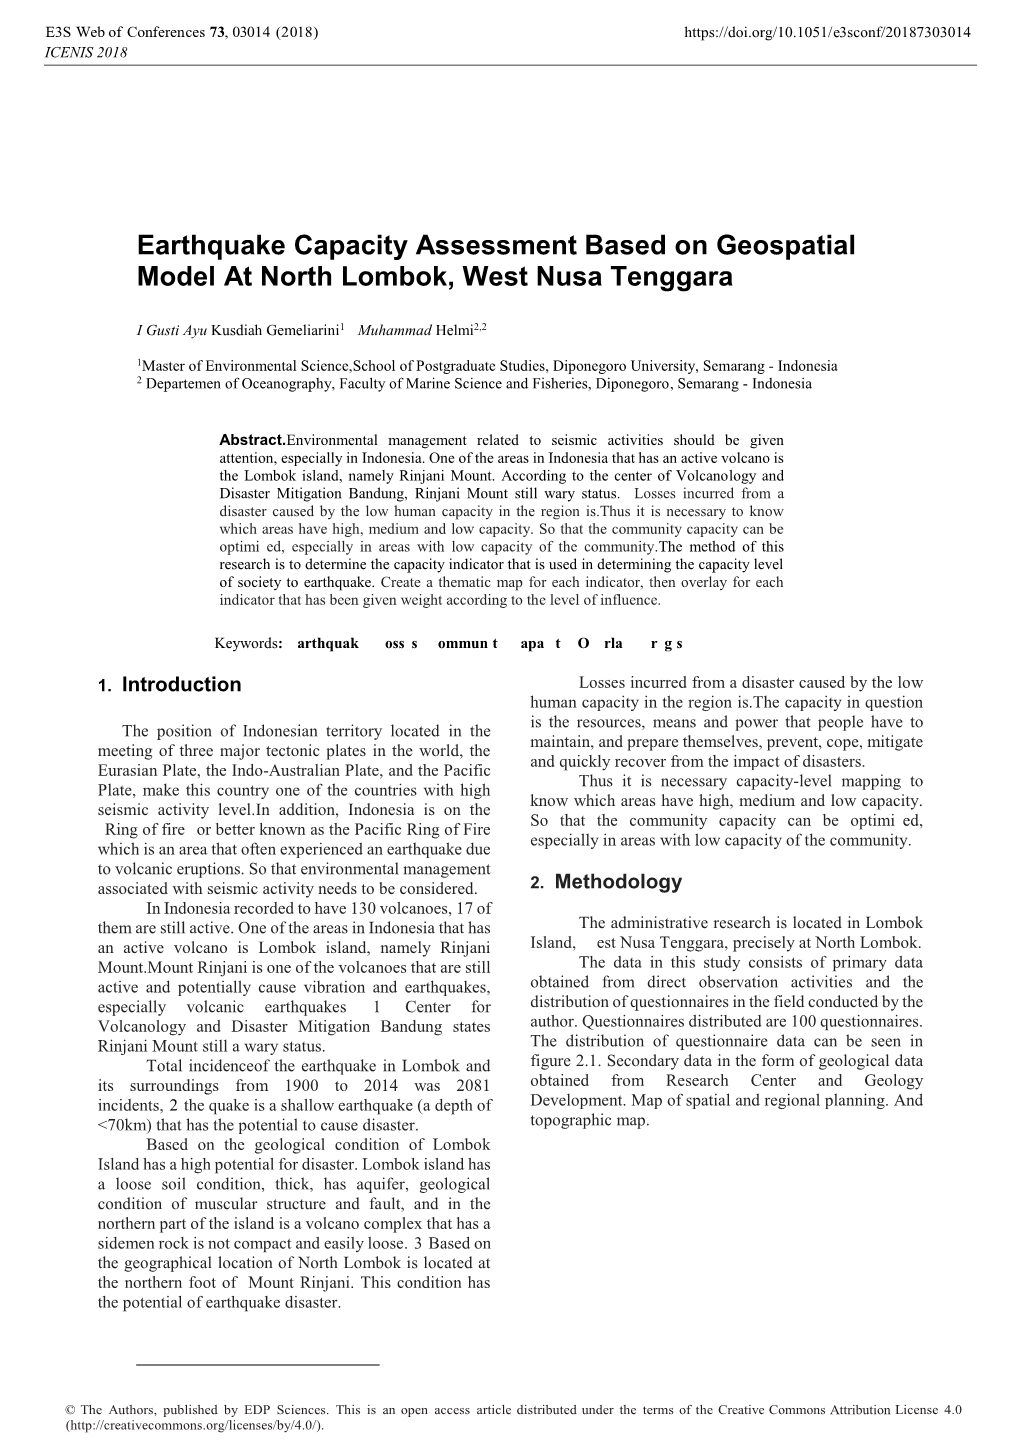 Earthquake Capacity Assessment Based on Geospatial Model at North Lombok, West Nusa Tenggara